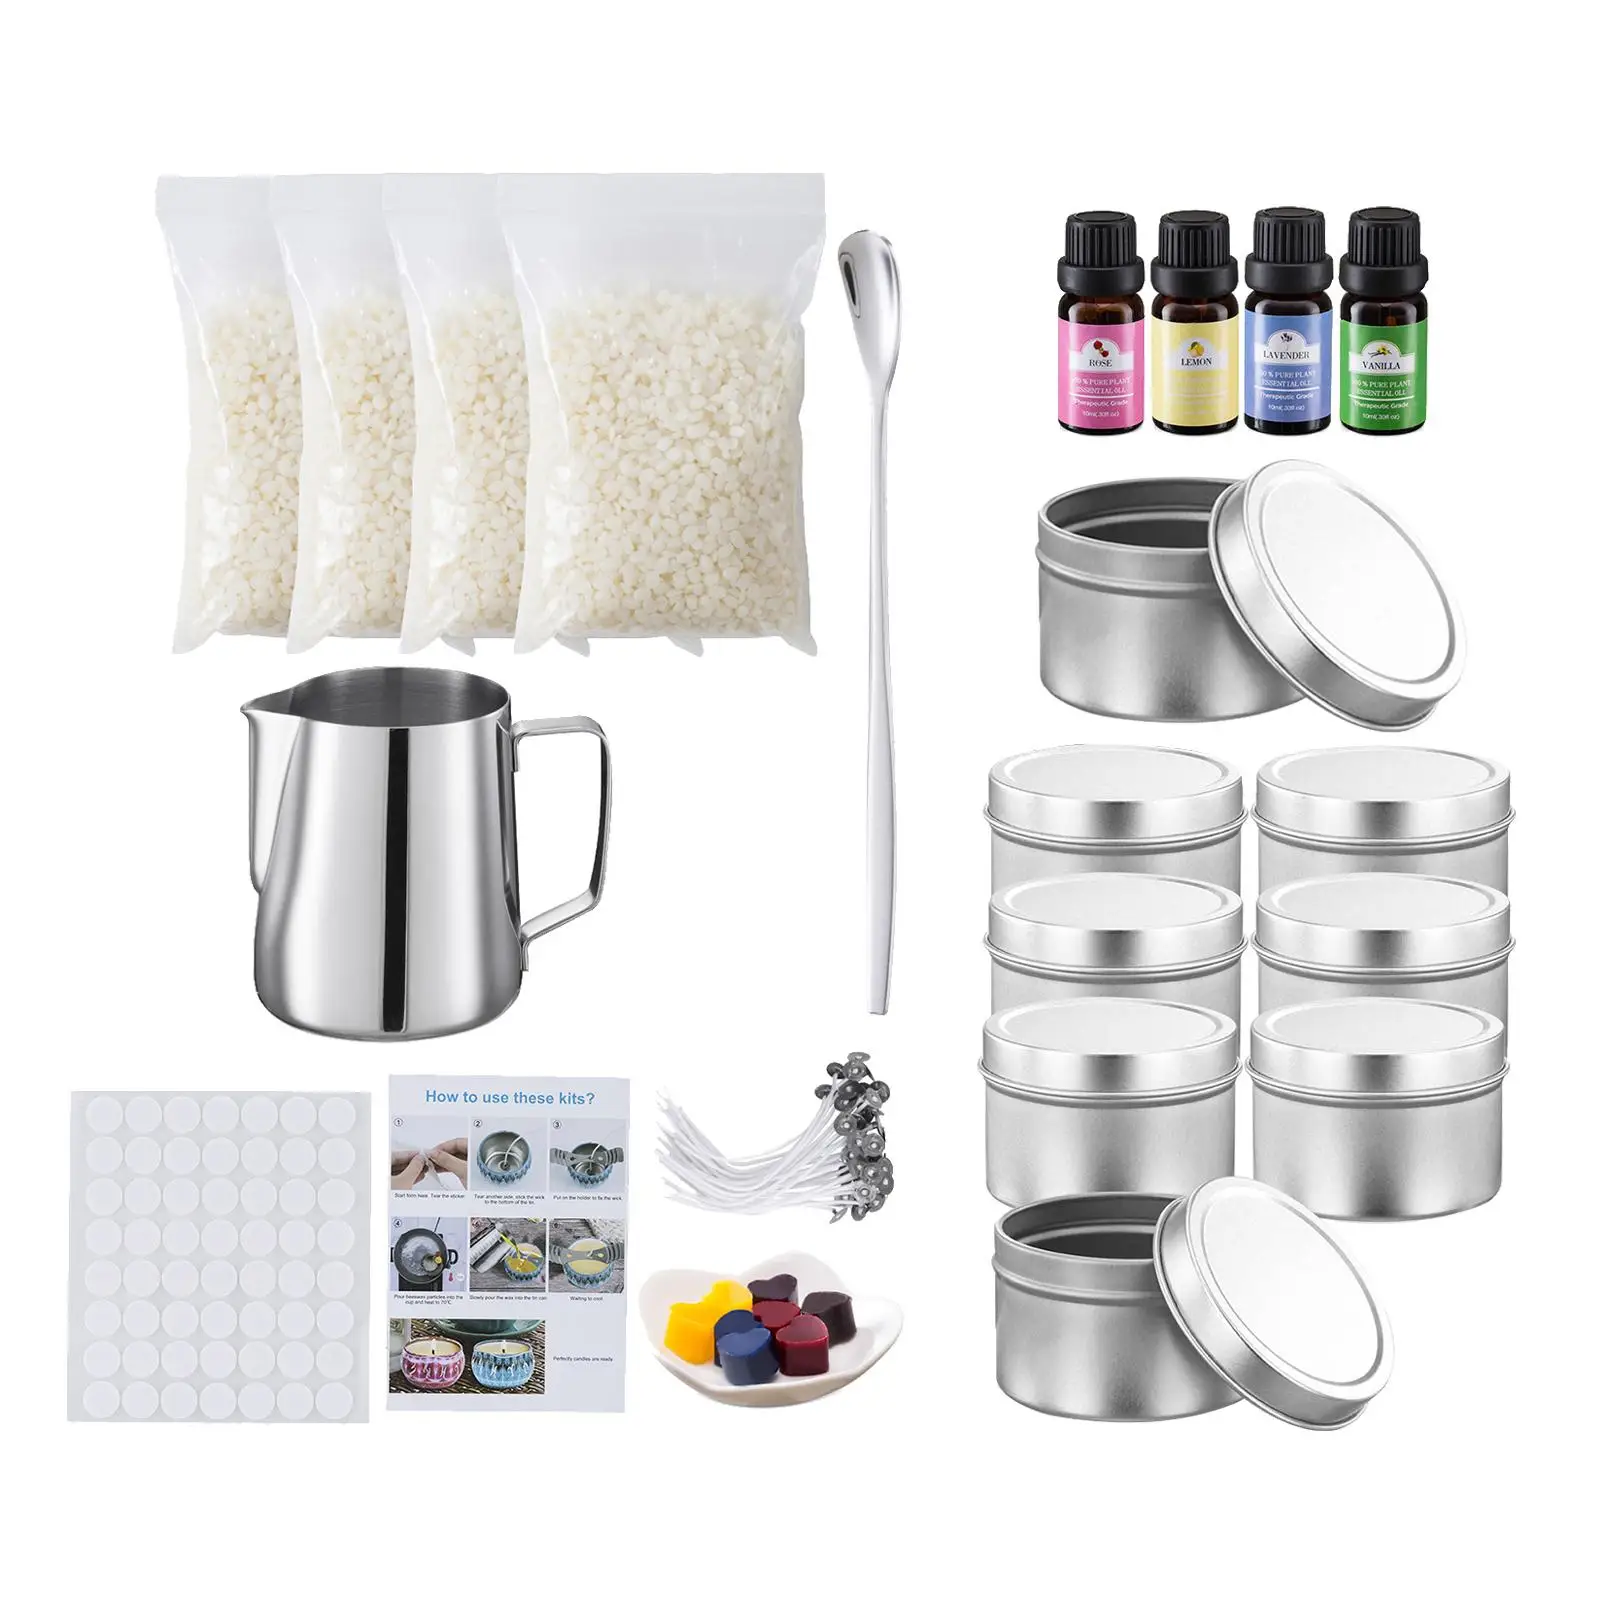 Candle Making Kit Supplies Tools, Melting Spouts Boiler Pot, Candle Wicks, Wick Stickers, Wick Holder, Stirring Spoon